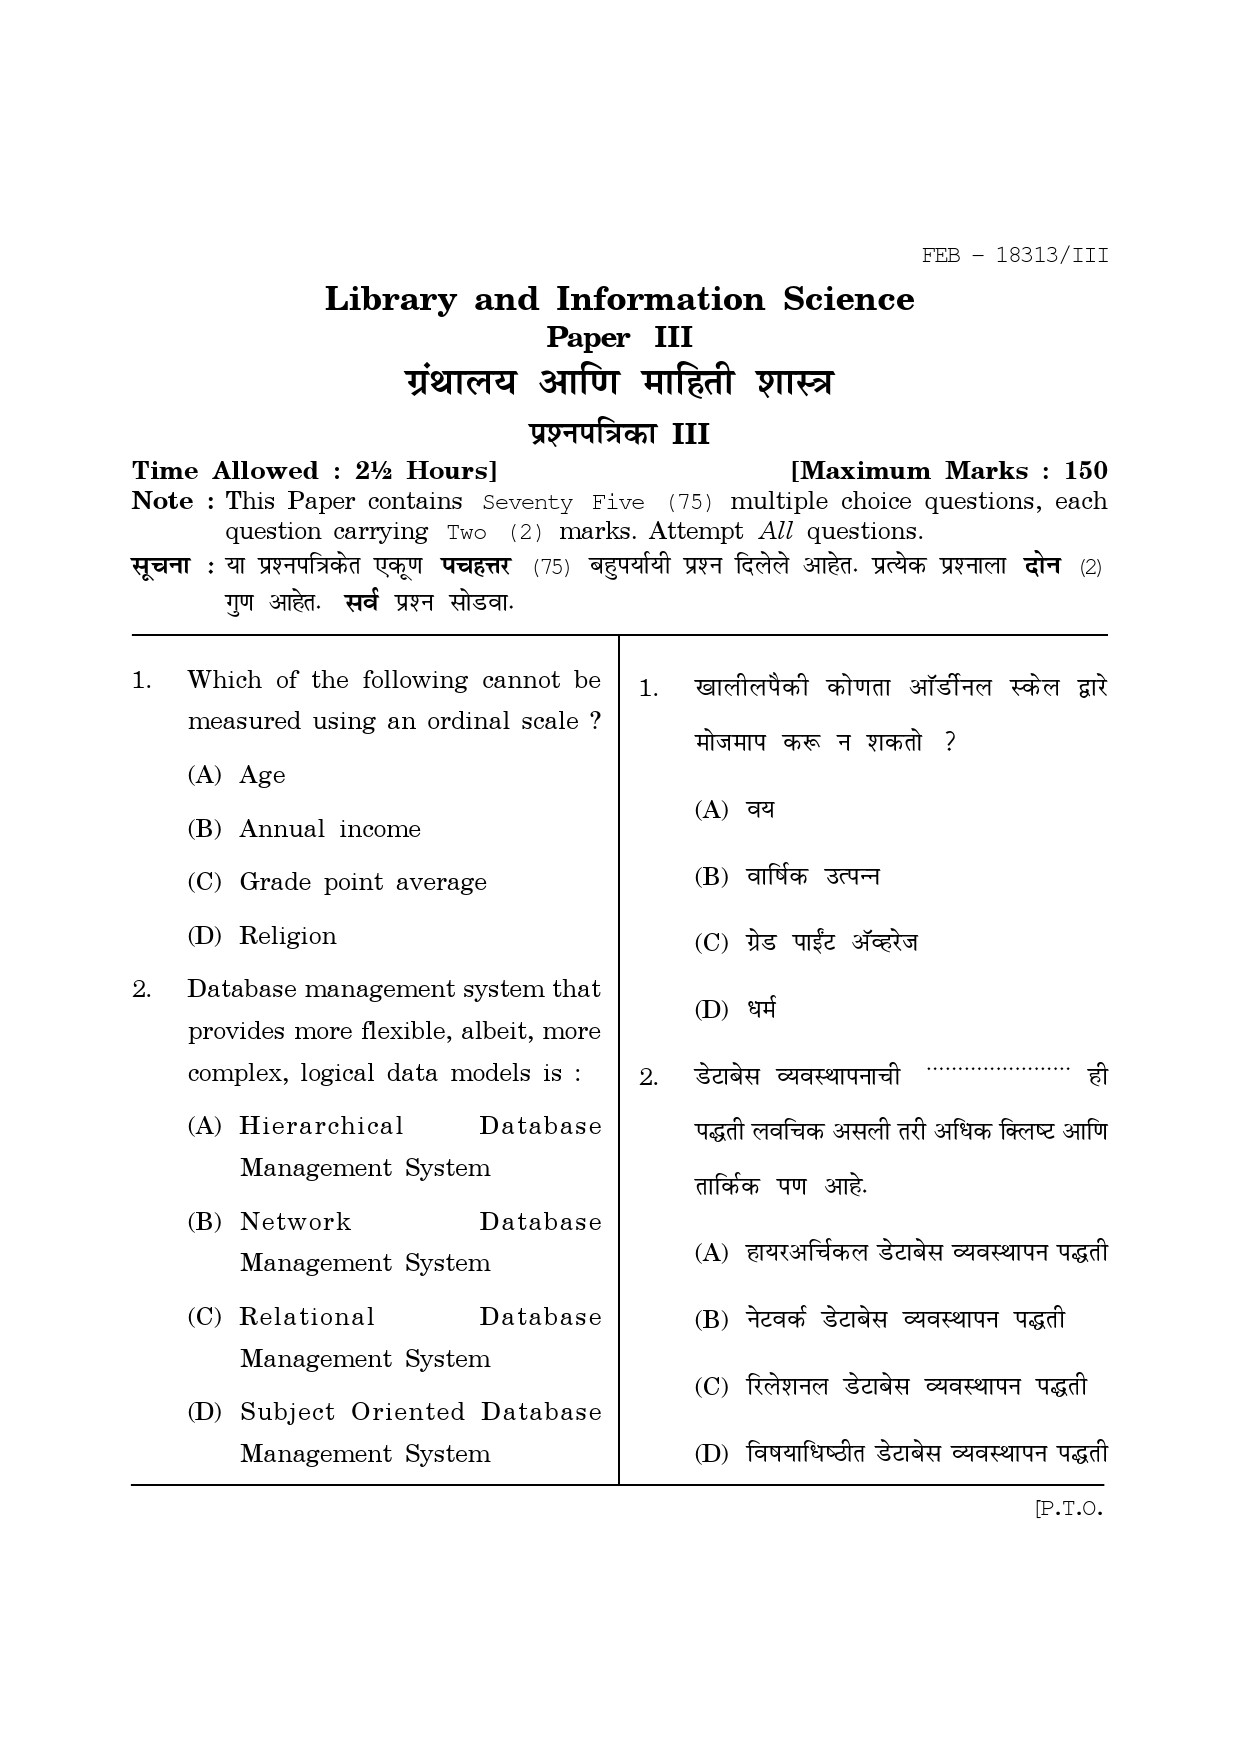 Maharashtra SET Library Information Science Question Paper III February 2013 1